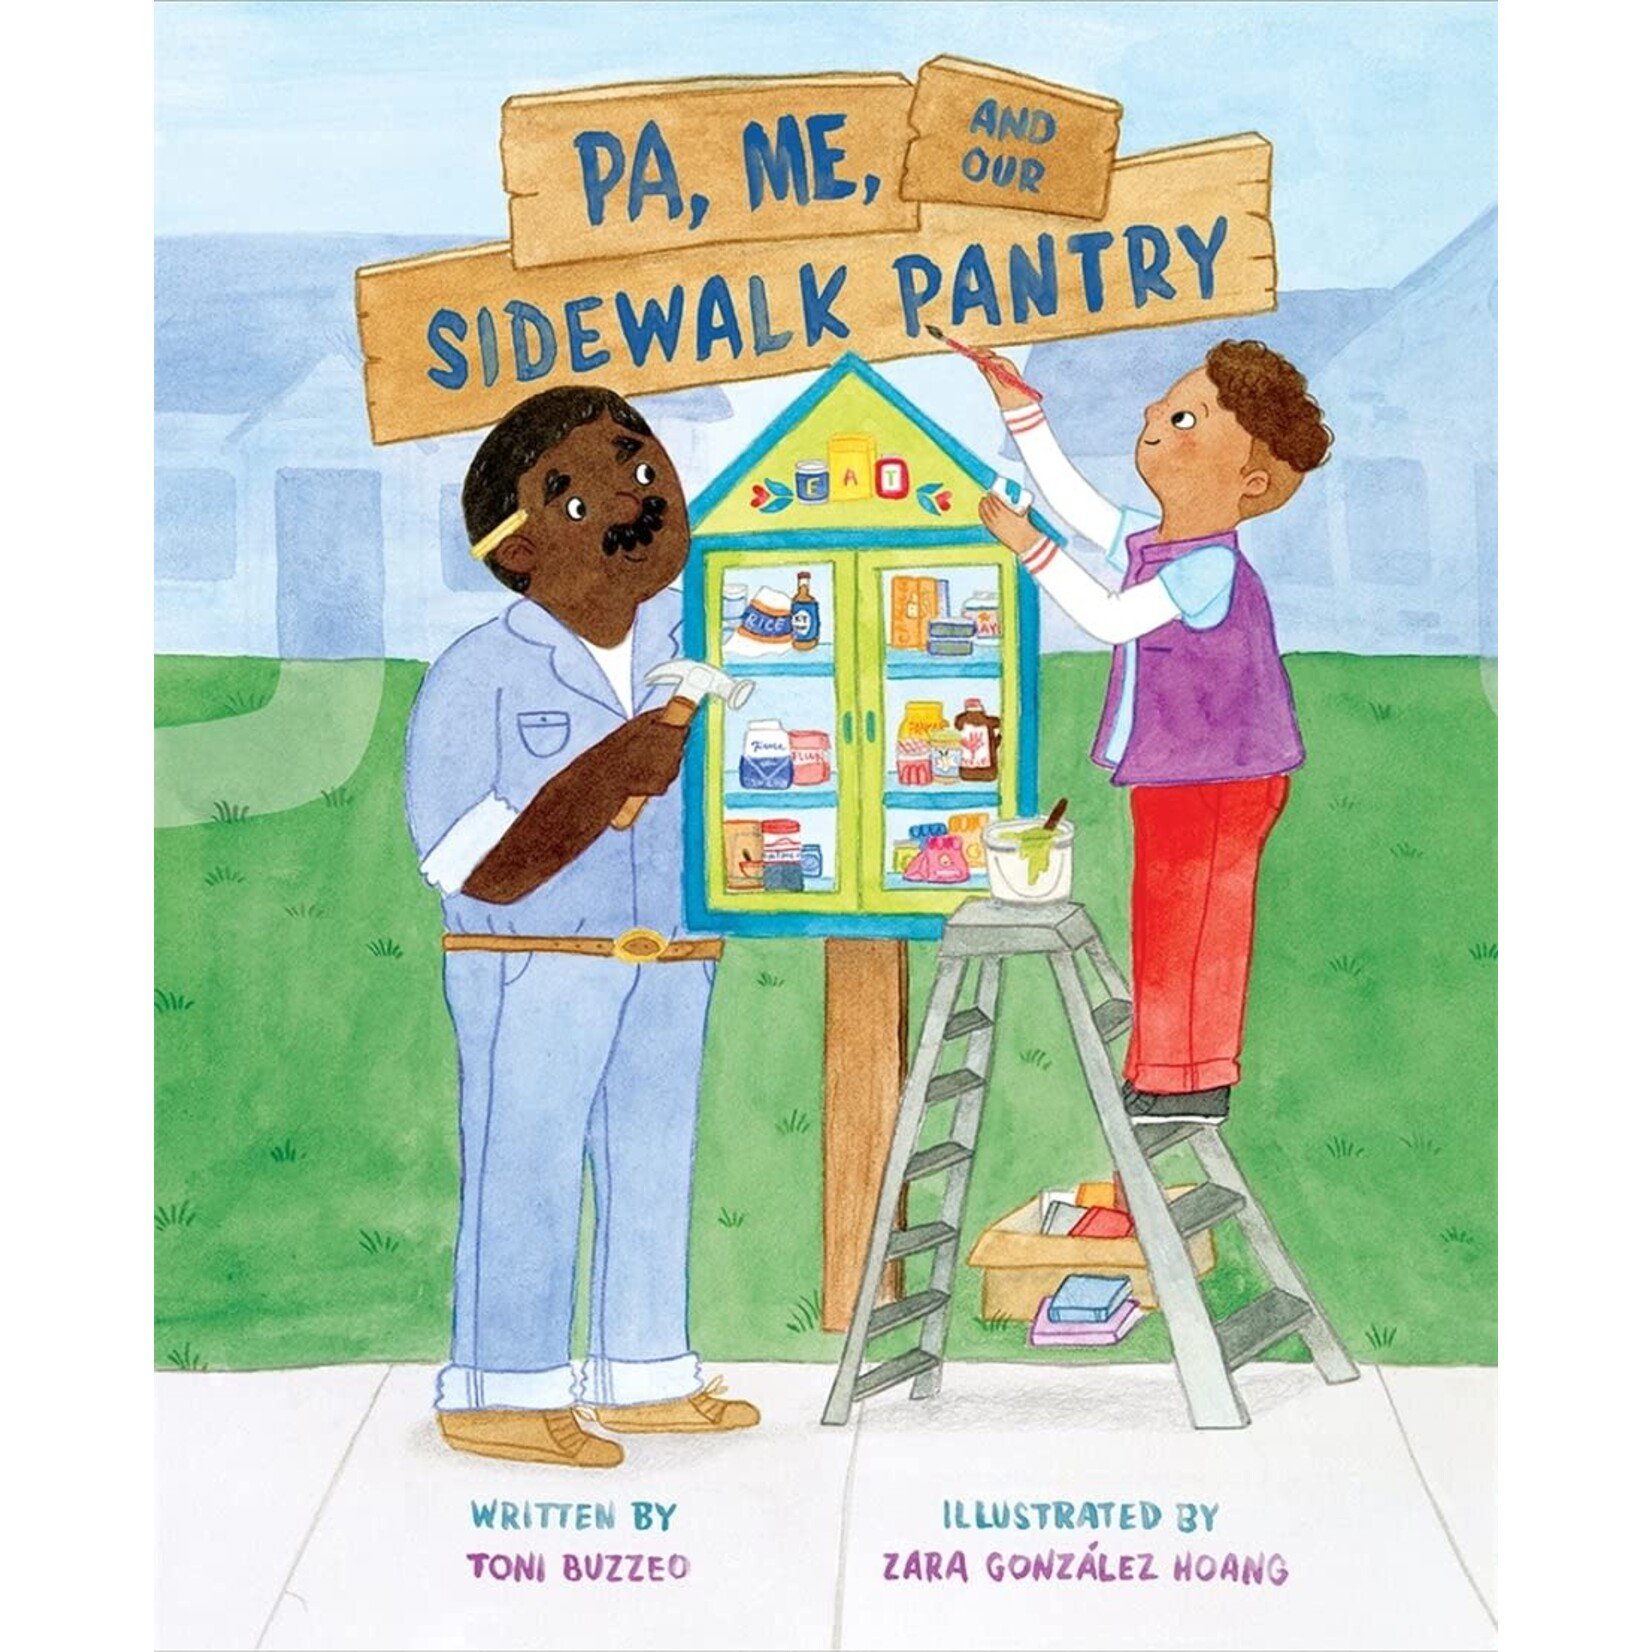 Pa, Me, and Our Sidewalk Pantry